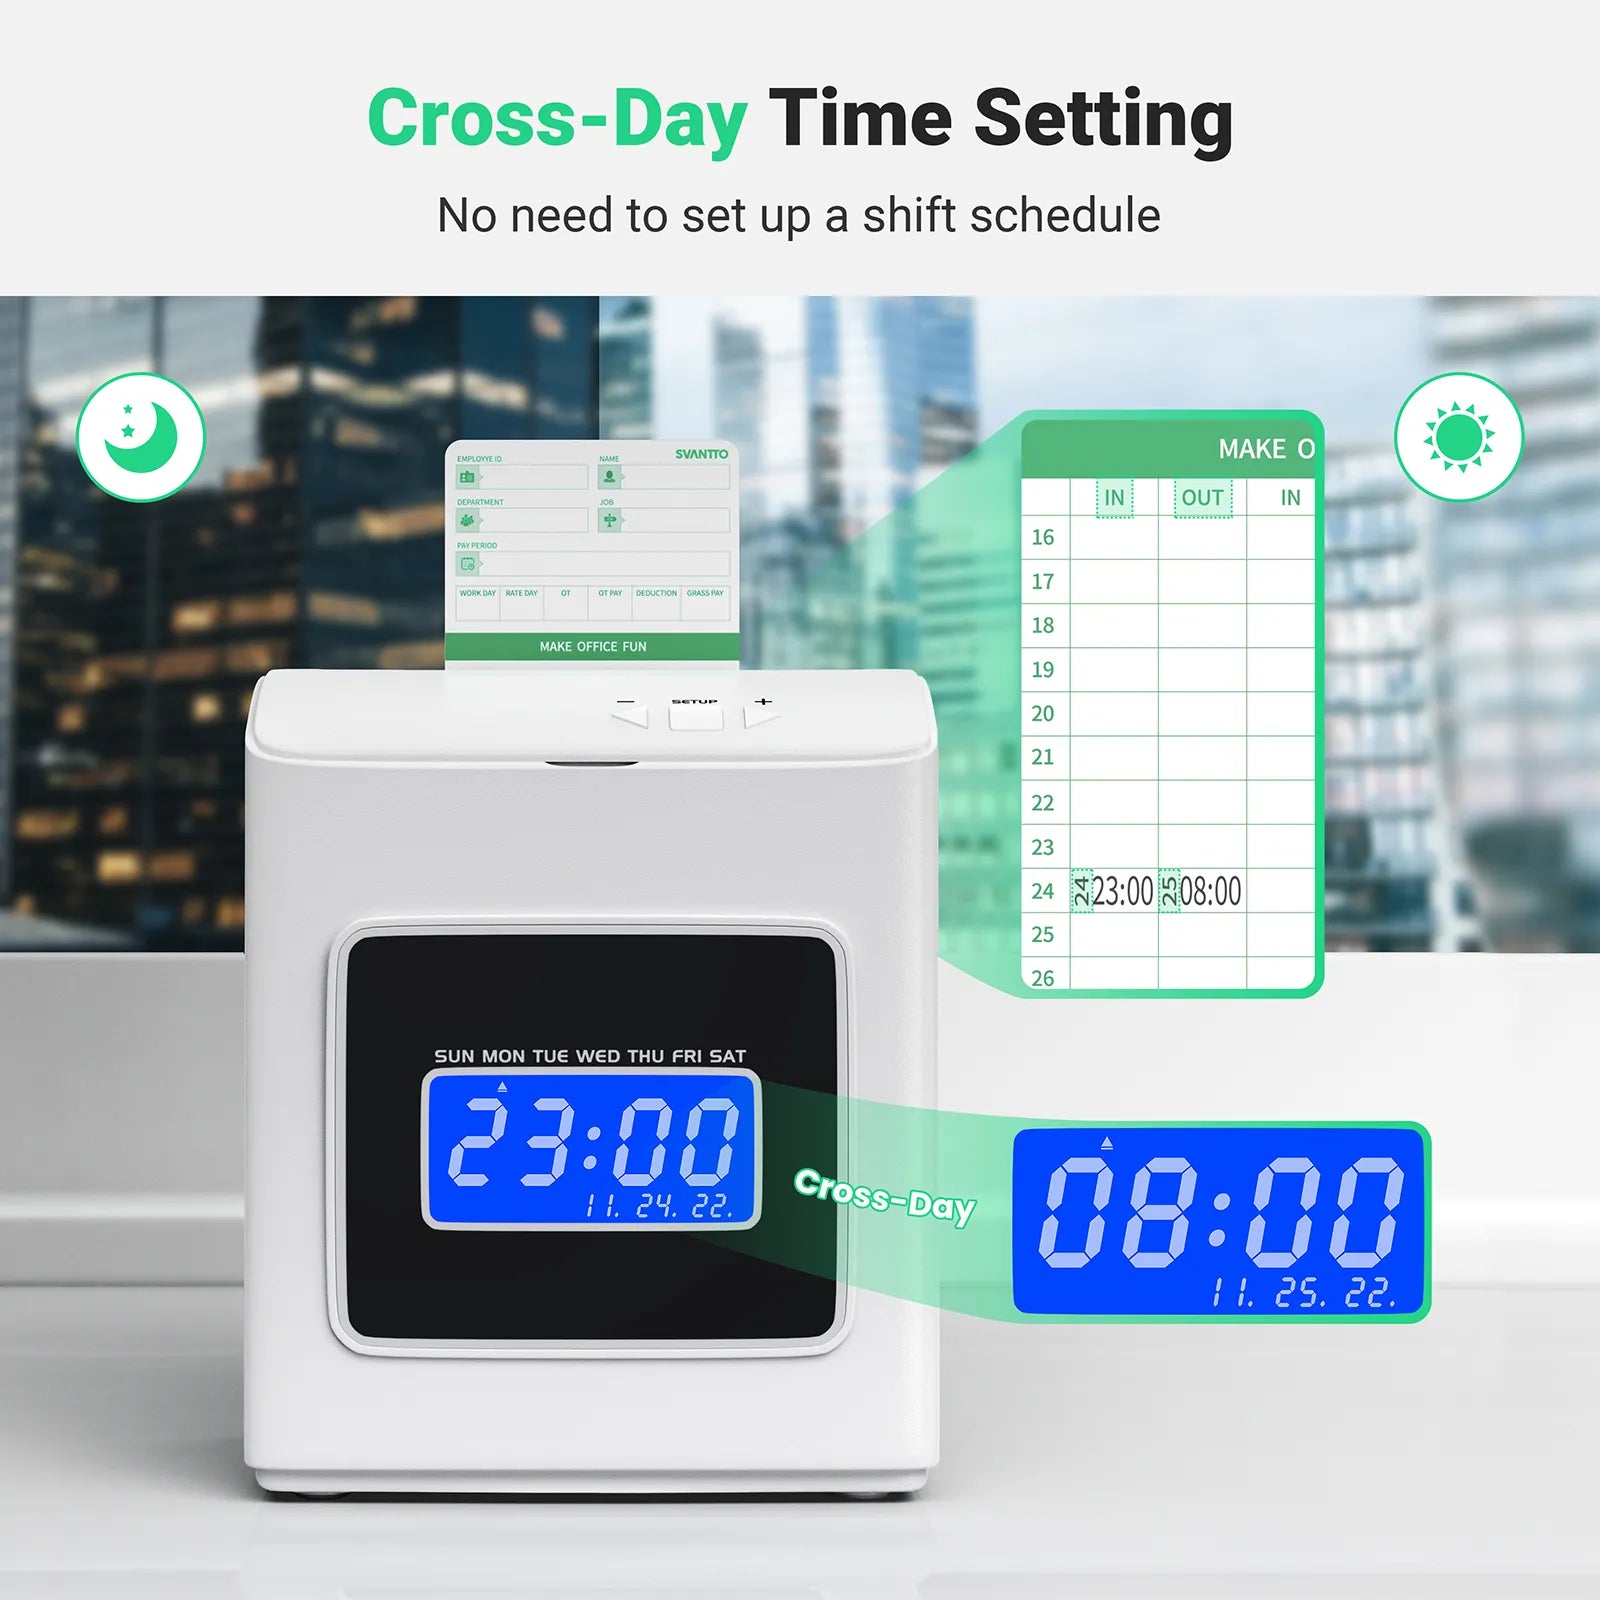 Svantto time card machine provides a cross-day time setting.